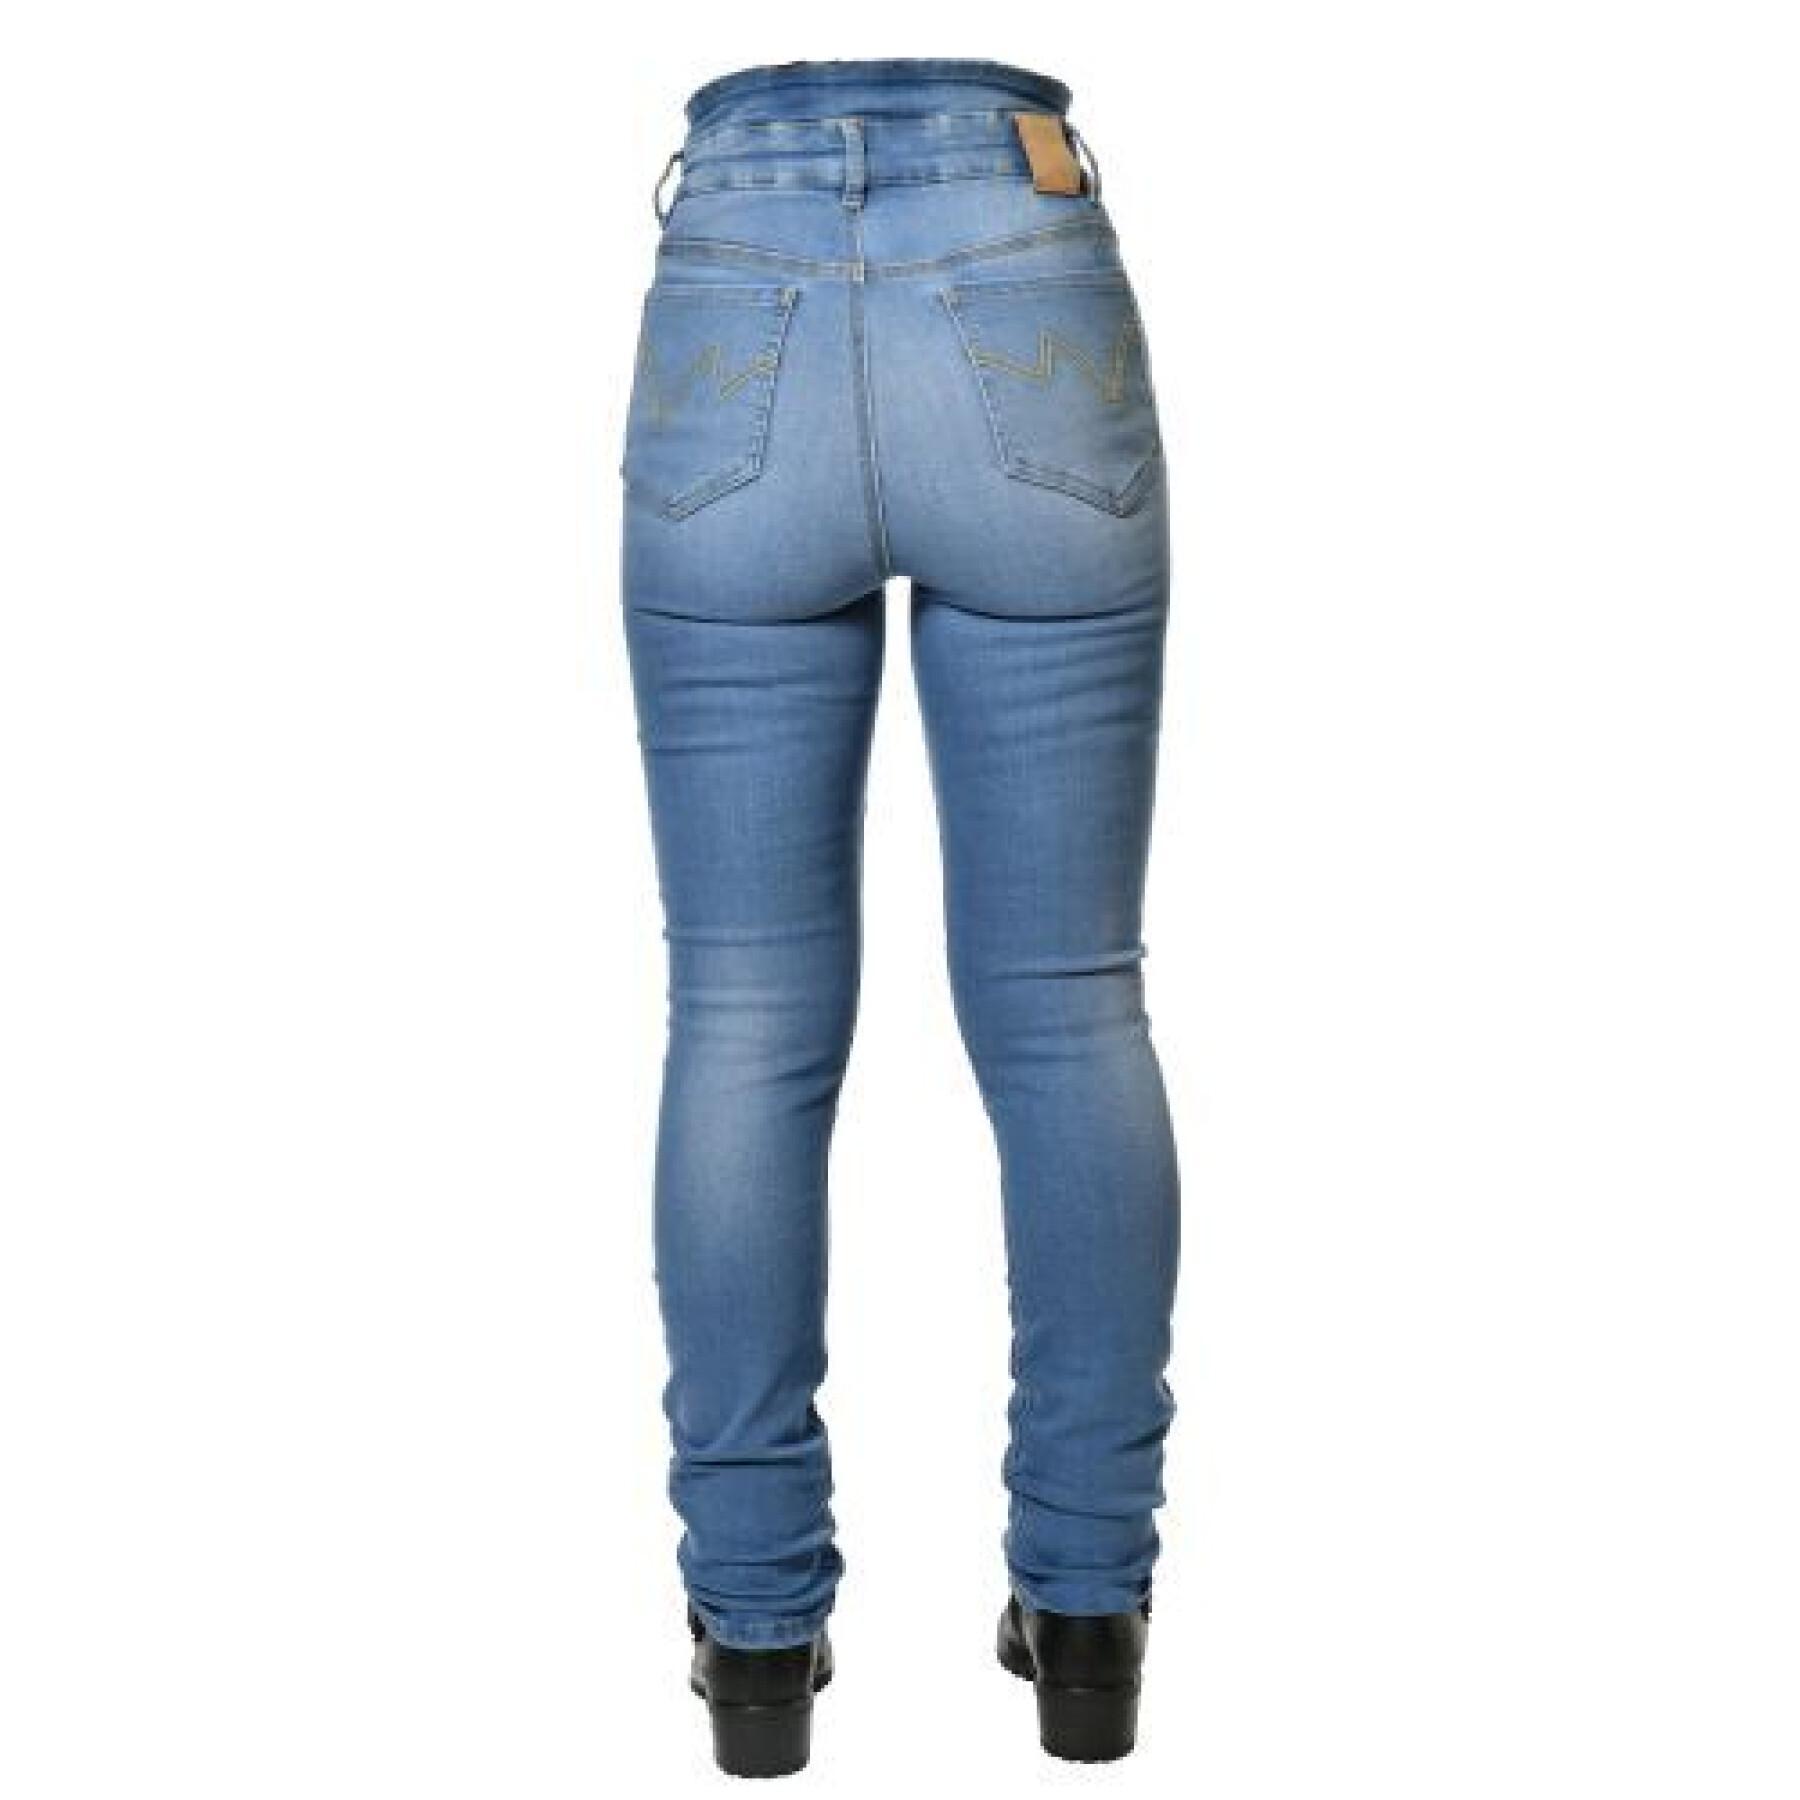 Jeans moto mujer Overlap Erin Single Layer Homologated